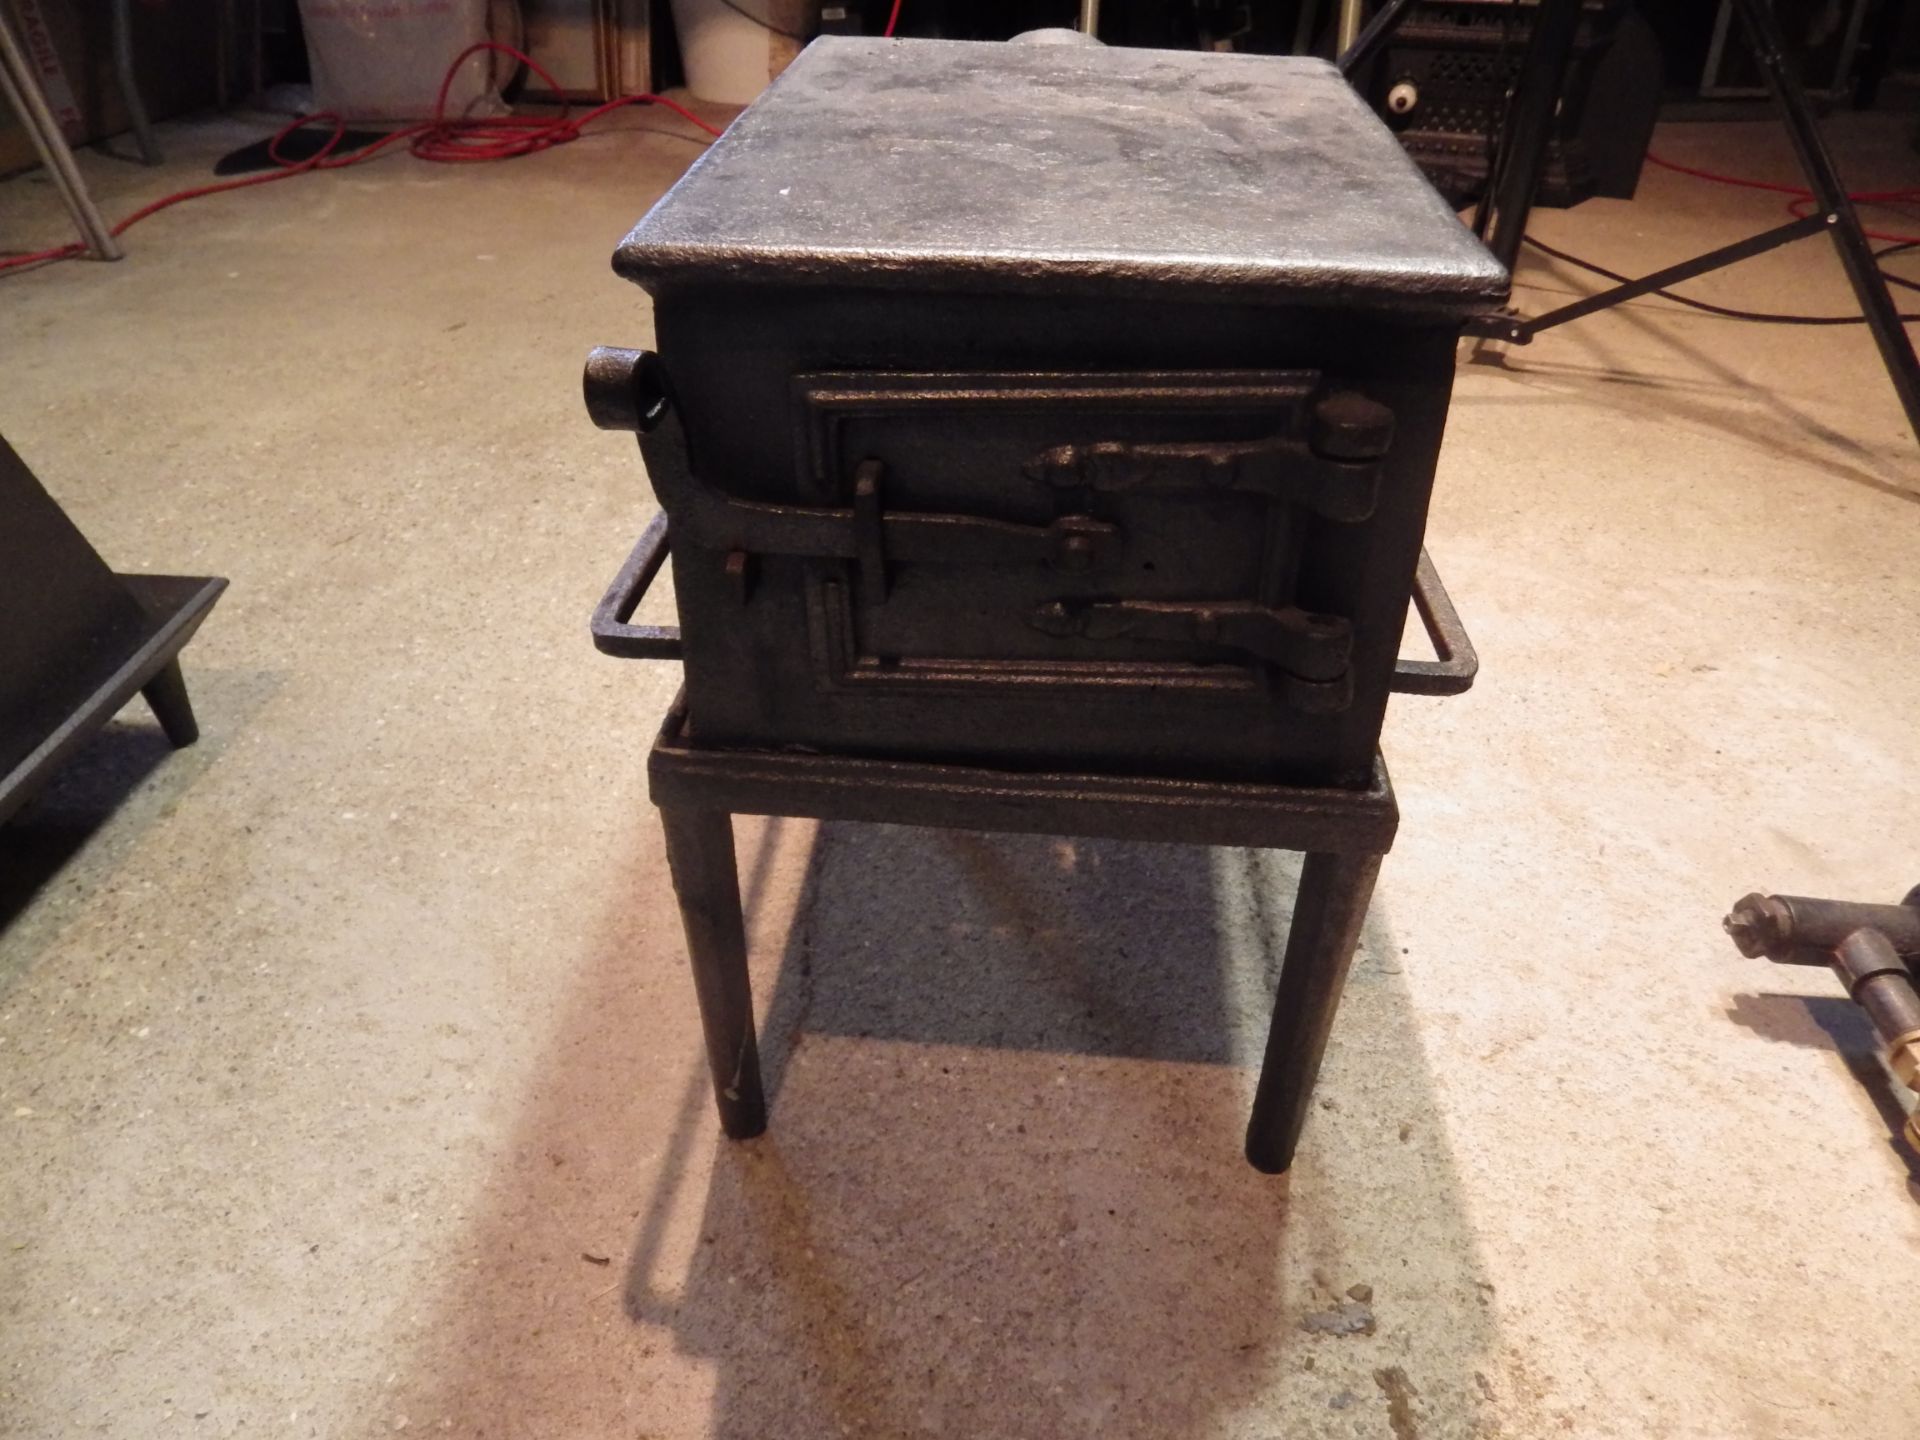 Large cast iron stove with grate and latch door on stand, stove is 34cm x 25cmx 19cm tall